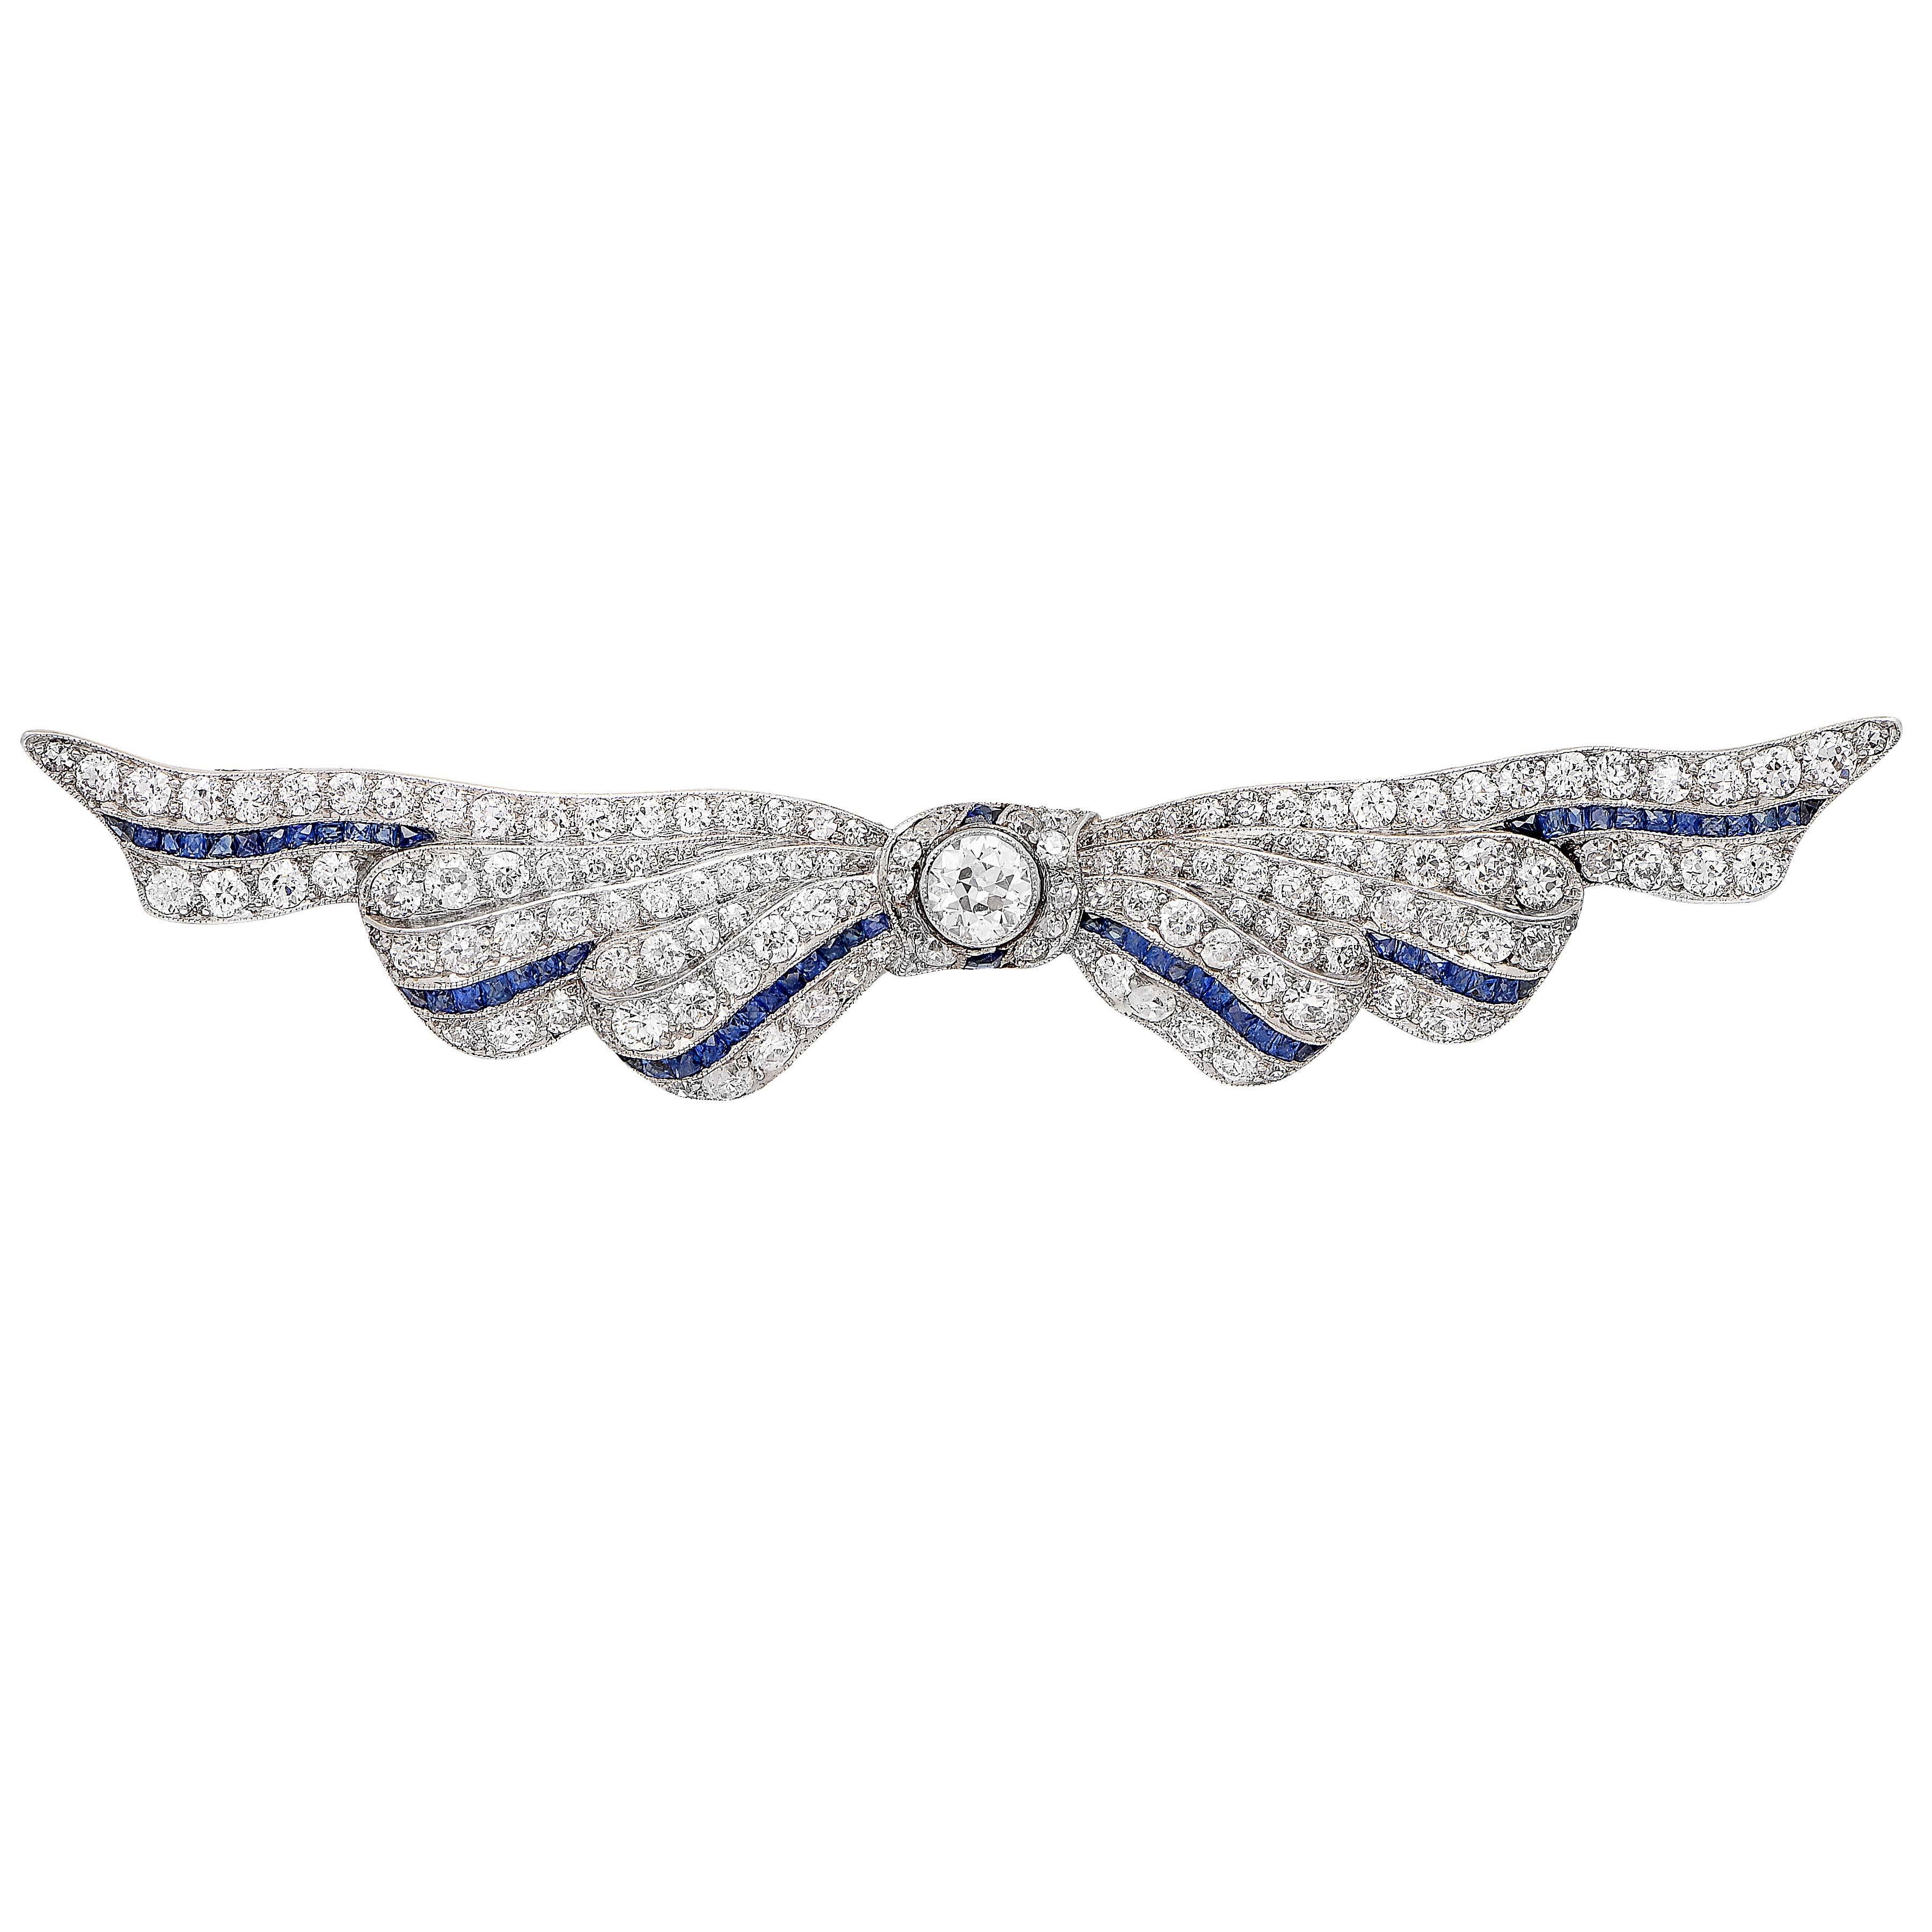 Diamond and Sapphire Ribbon Platinum Brooch featuring 126 mix cut diamonds with an approximate total weight of 3 carats. Circa 1930's

Metal Type: Platinum (stamped and/or tested)
Metal Weight: 9.6 Grams